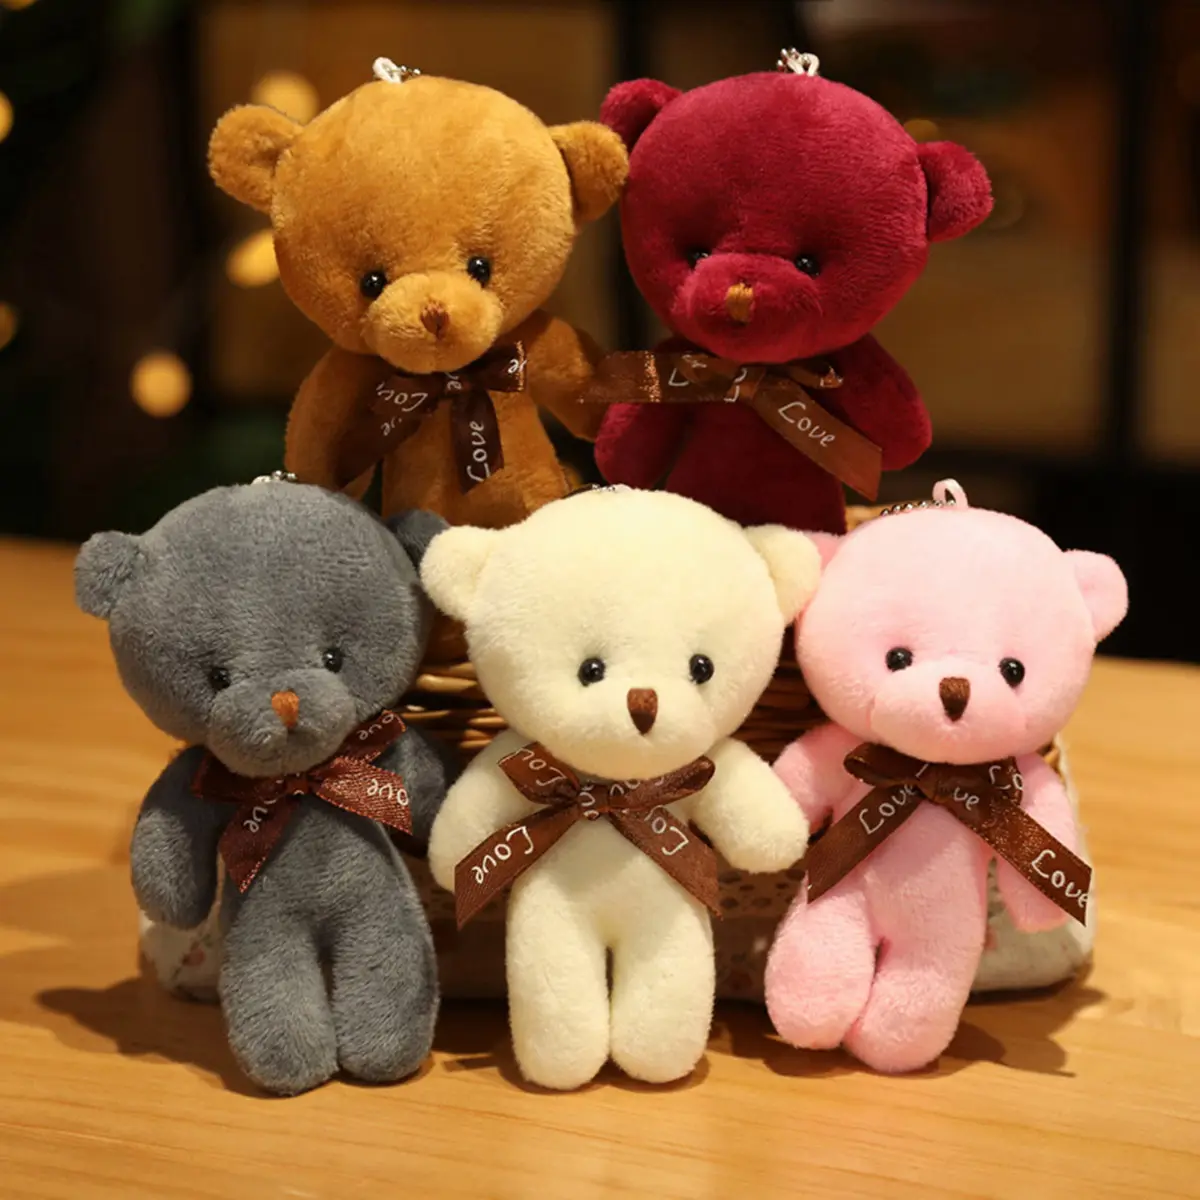 12 cm High Quality Mini Teddy Bear Dolls Plush Small Bears with Bows Promotion Gifts